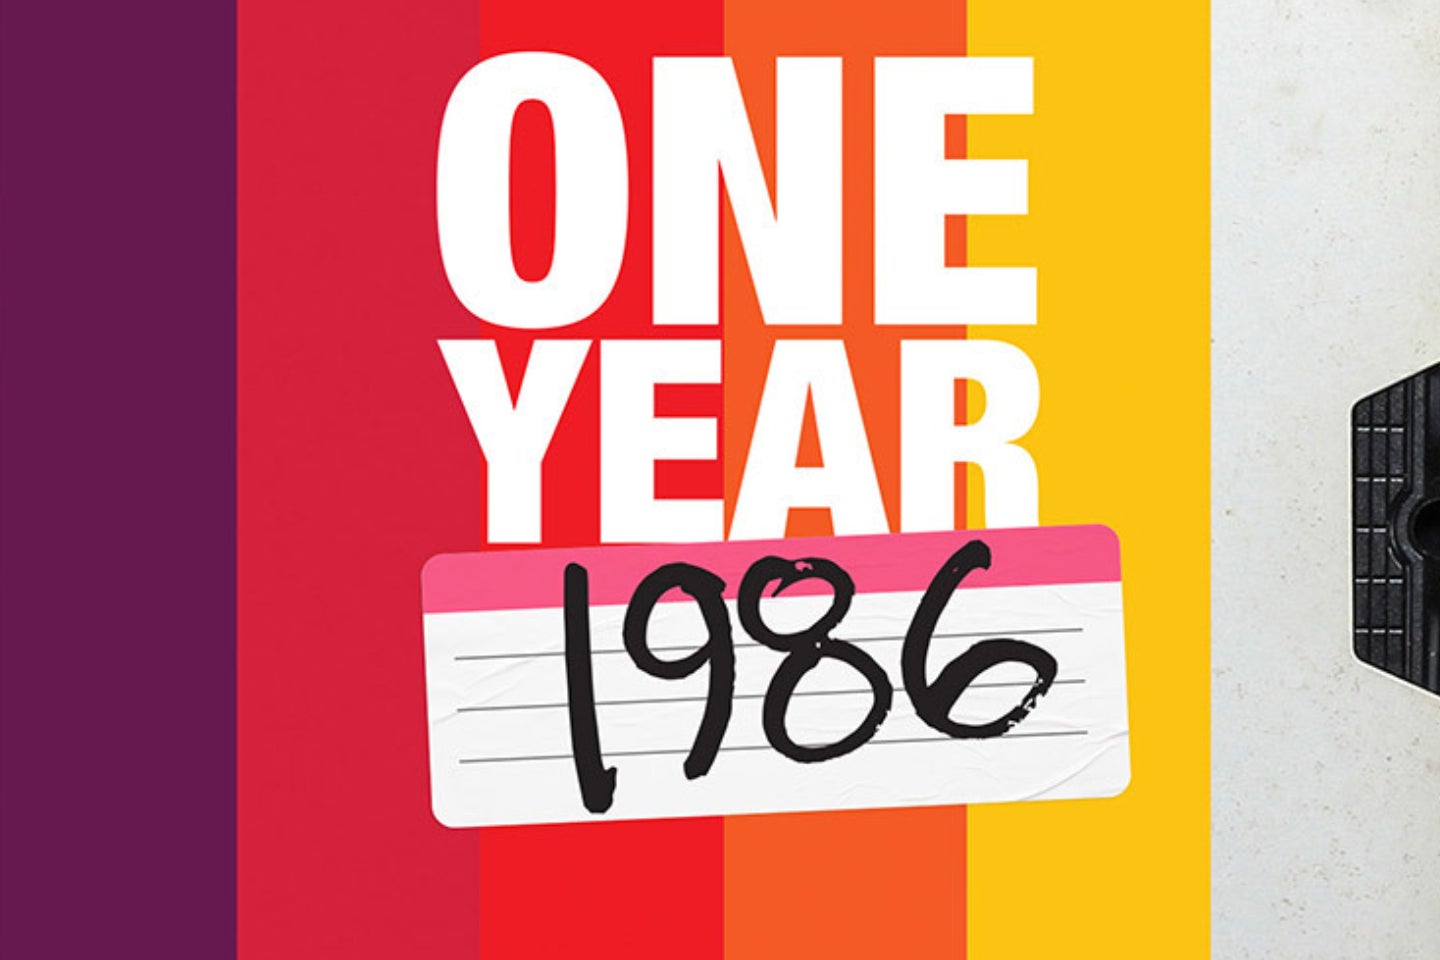 Text on a color-blocked background that reads: One Year: 1986.